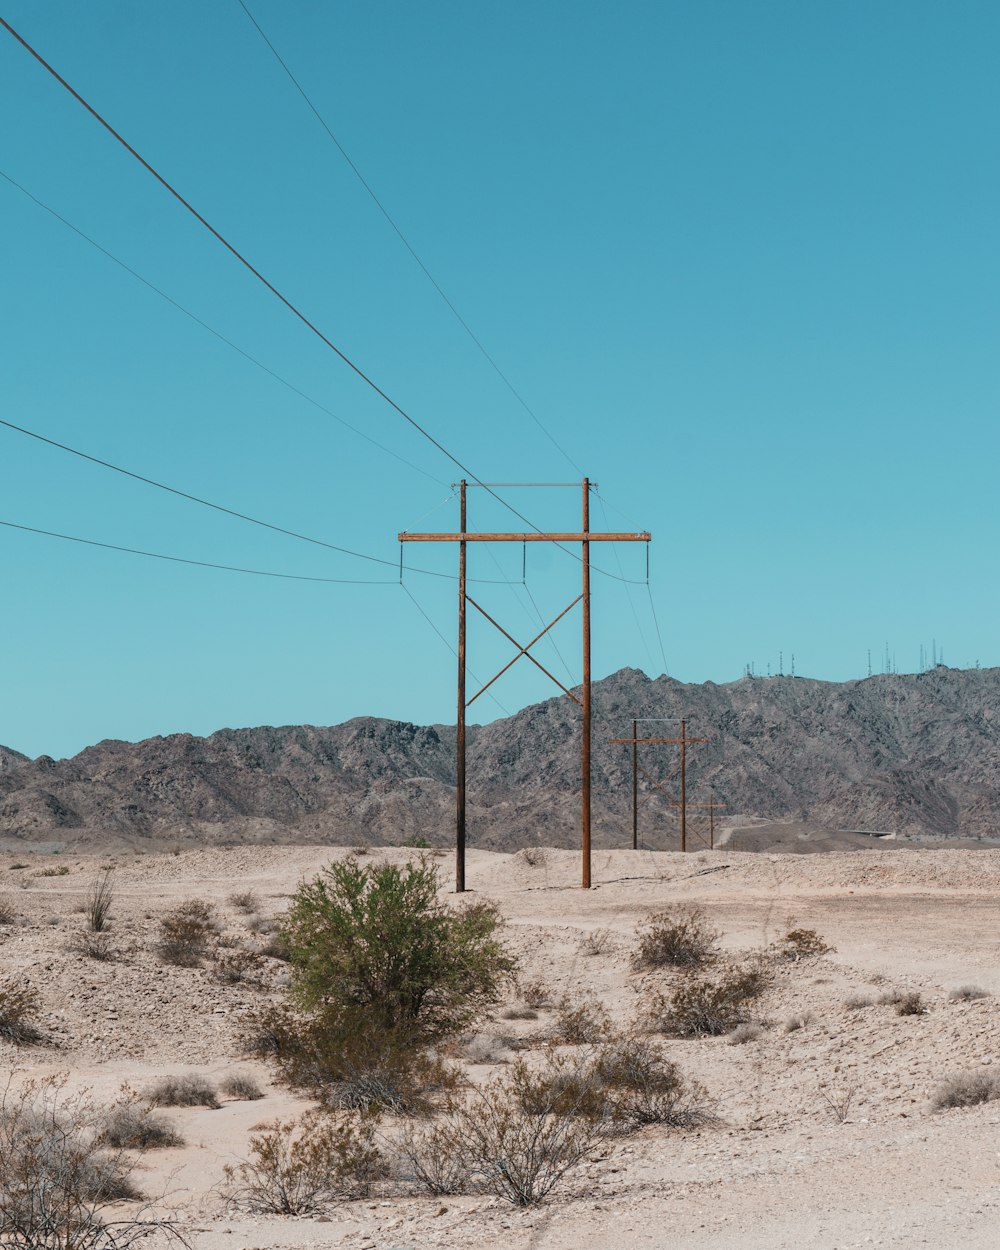 view of cable lines at the desert area